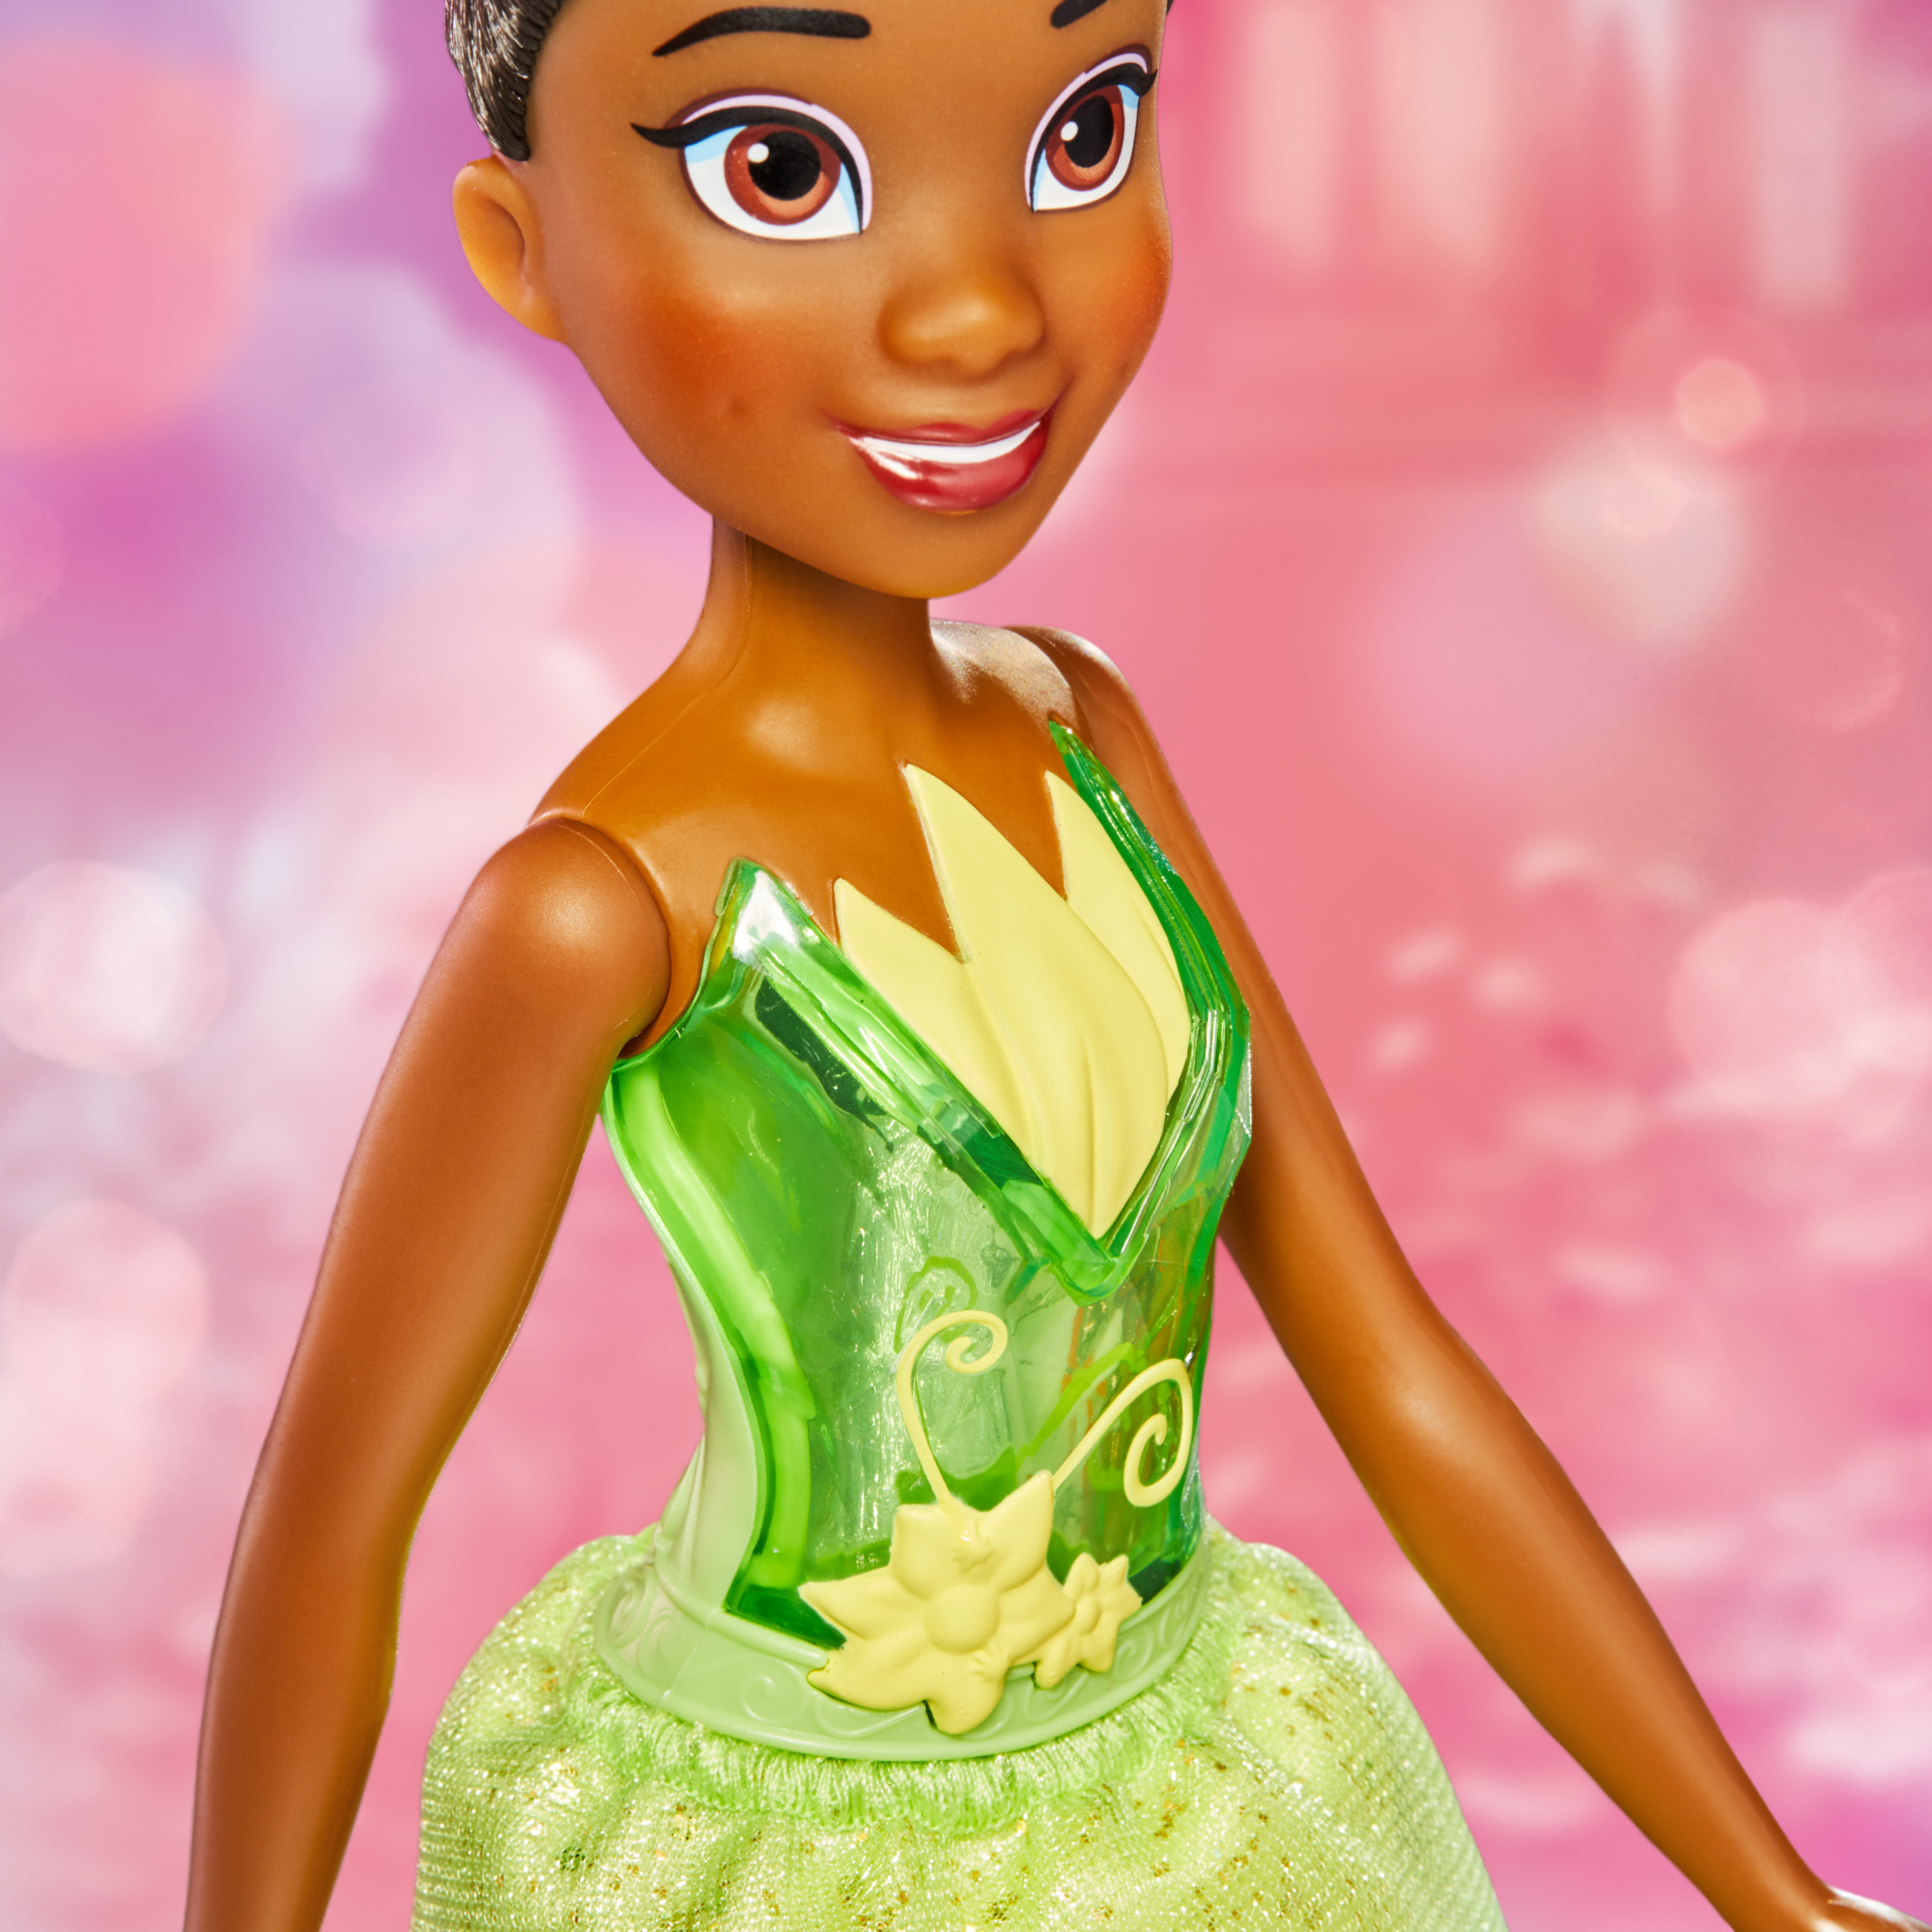 Disney Princess Royal Shimmer Tiana Fashion Doll, Accessories Included - image 5 of 9